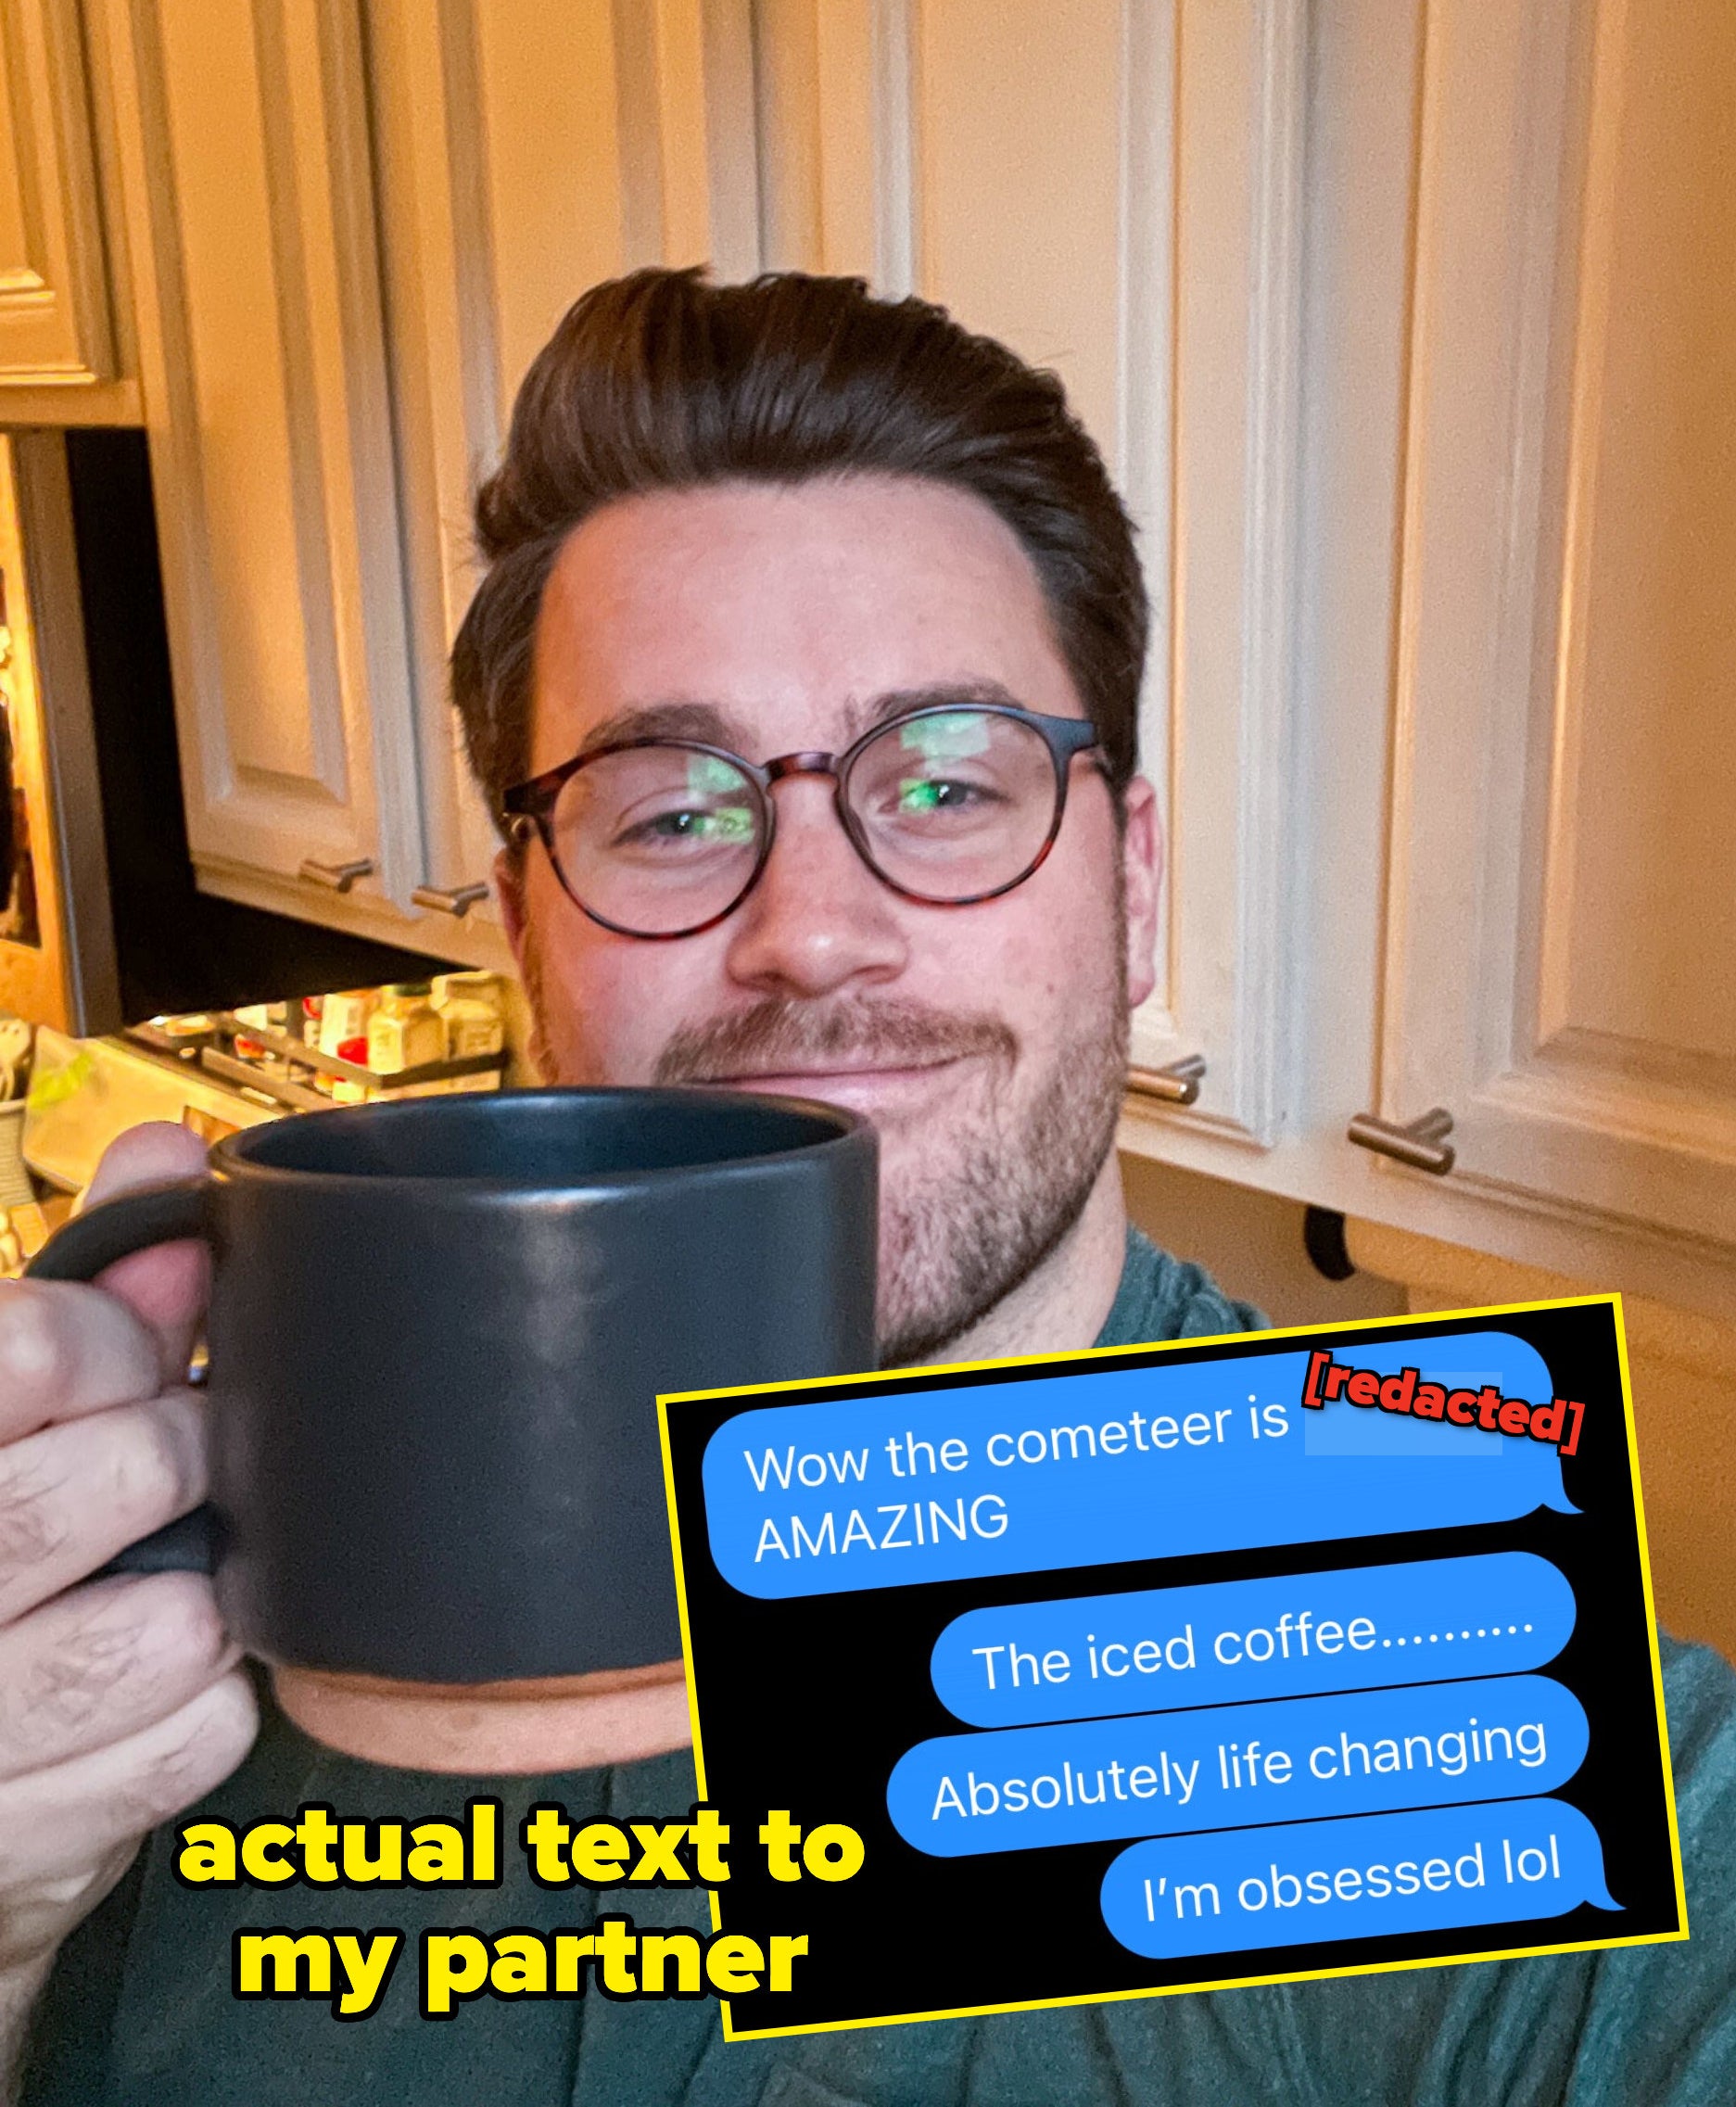 author holding up coffee mug with texts to his partner saying wow the cometeer is redacted AMAZING